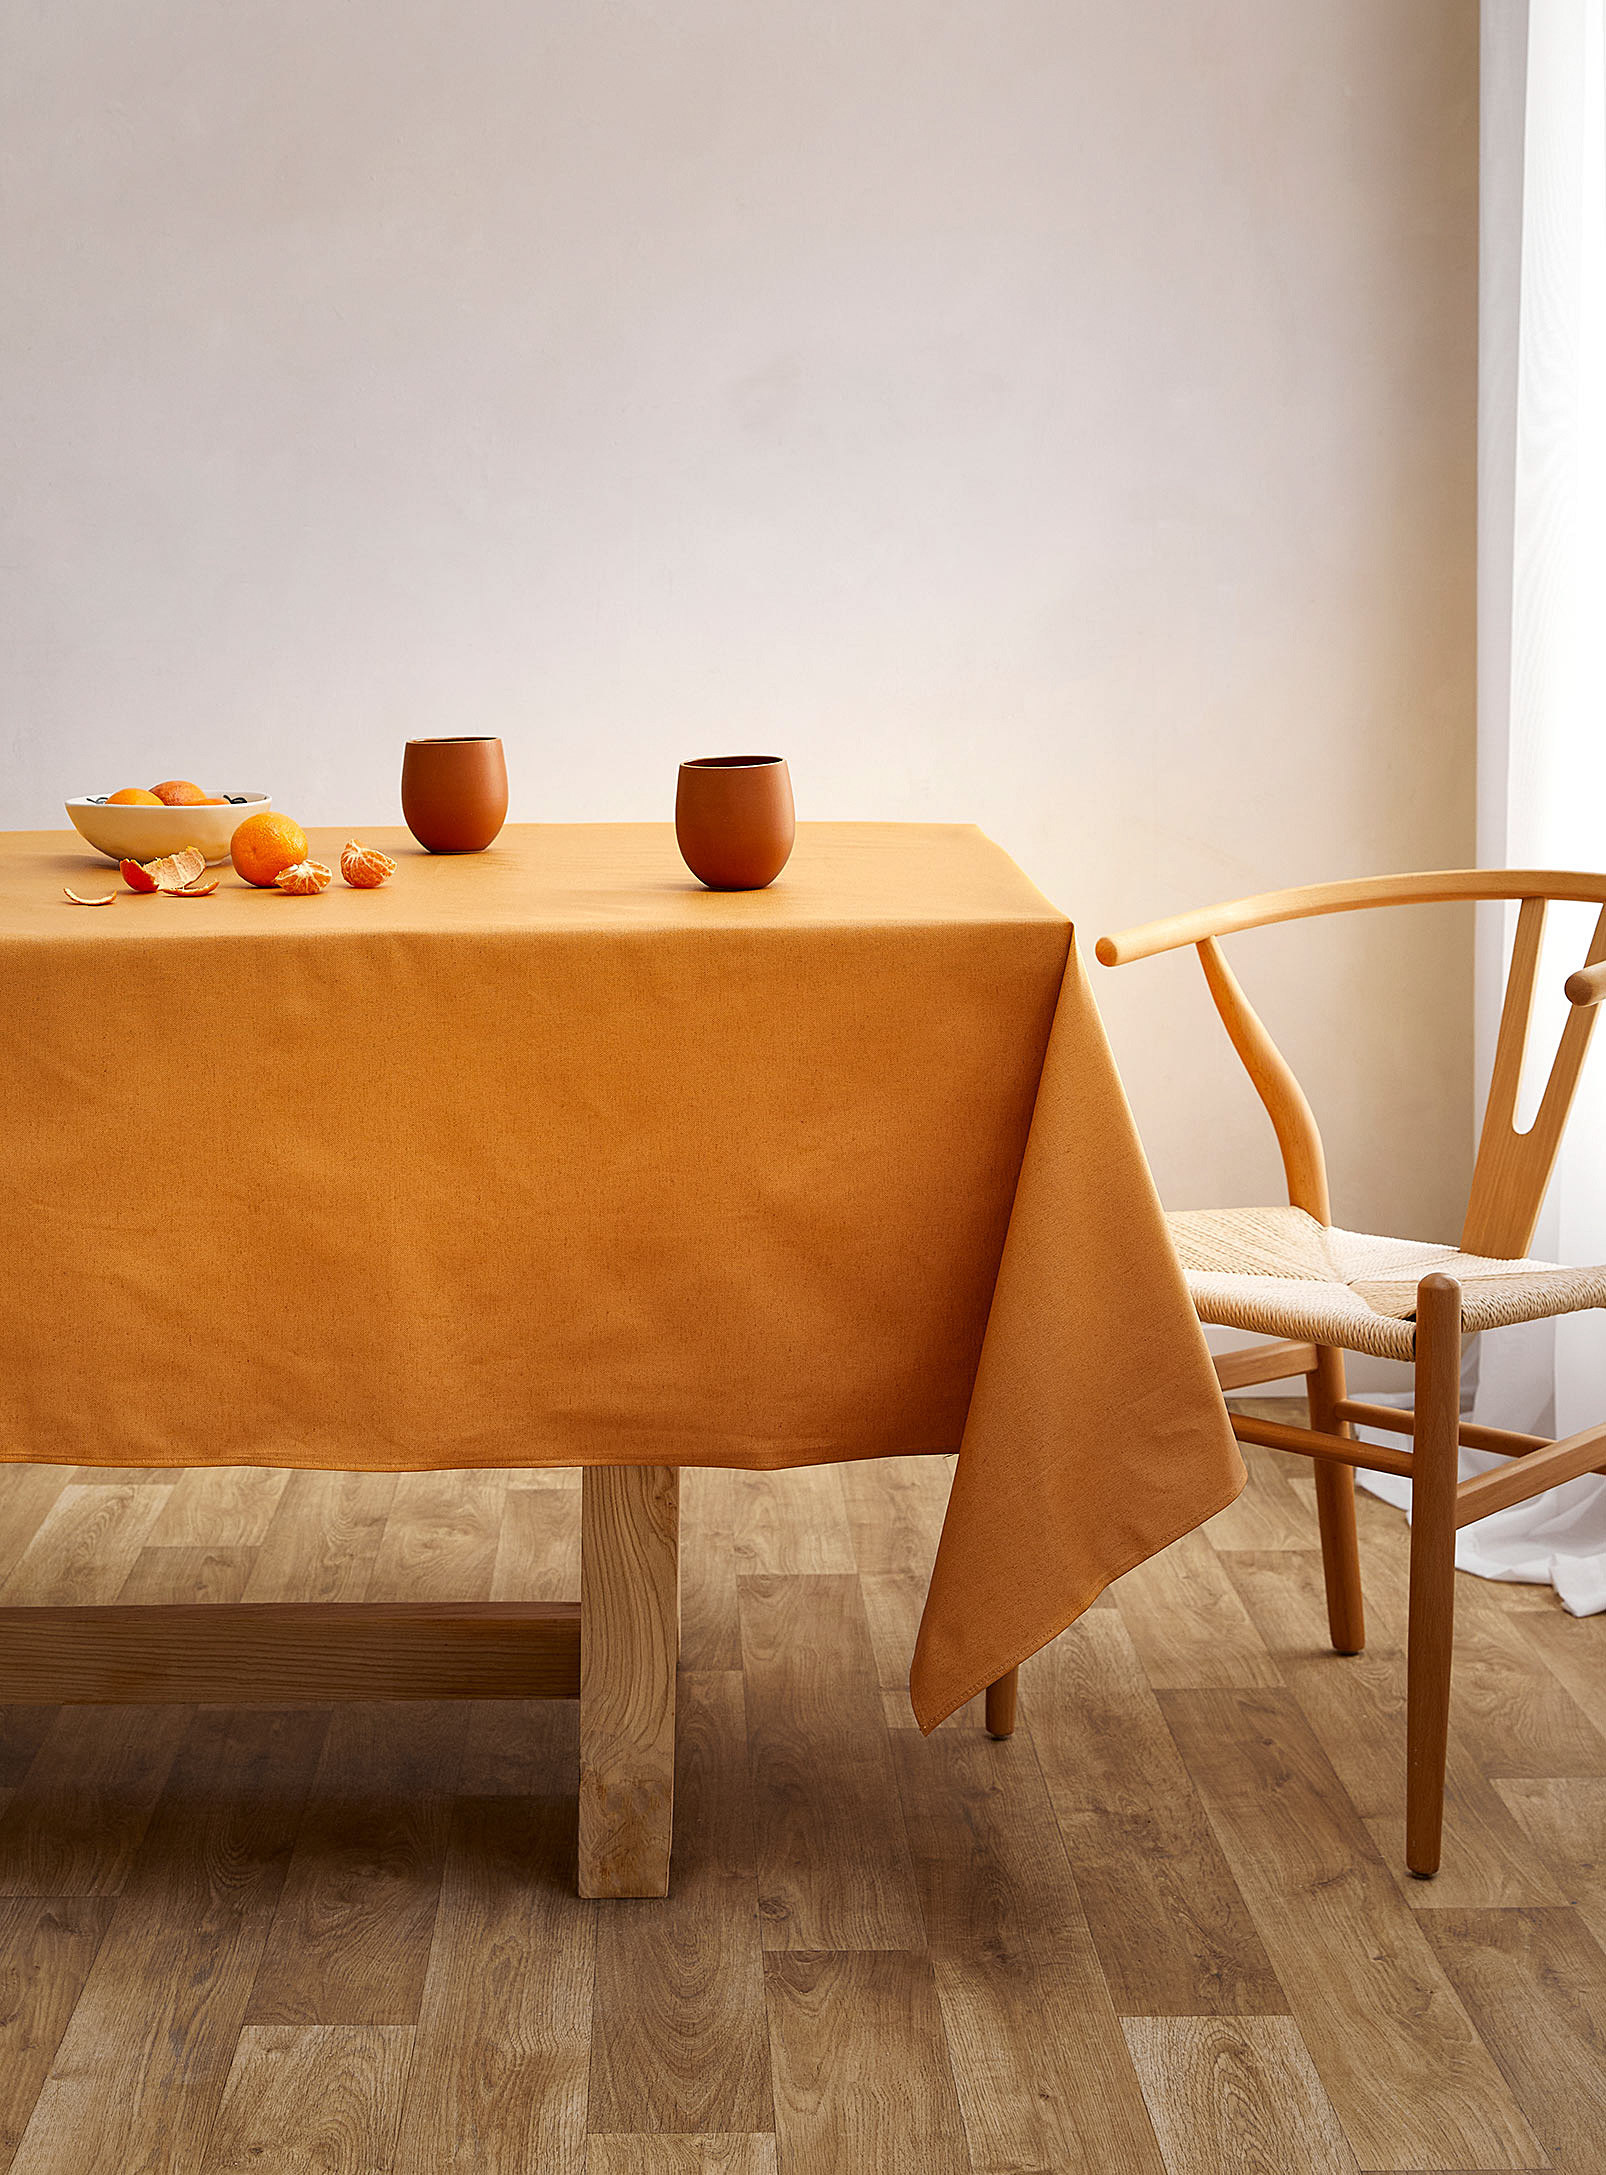 Simons Maison Speckled Orange Linen And Cotton Coated Tablecloth In Ochre Yellow